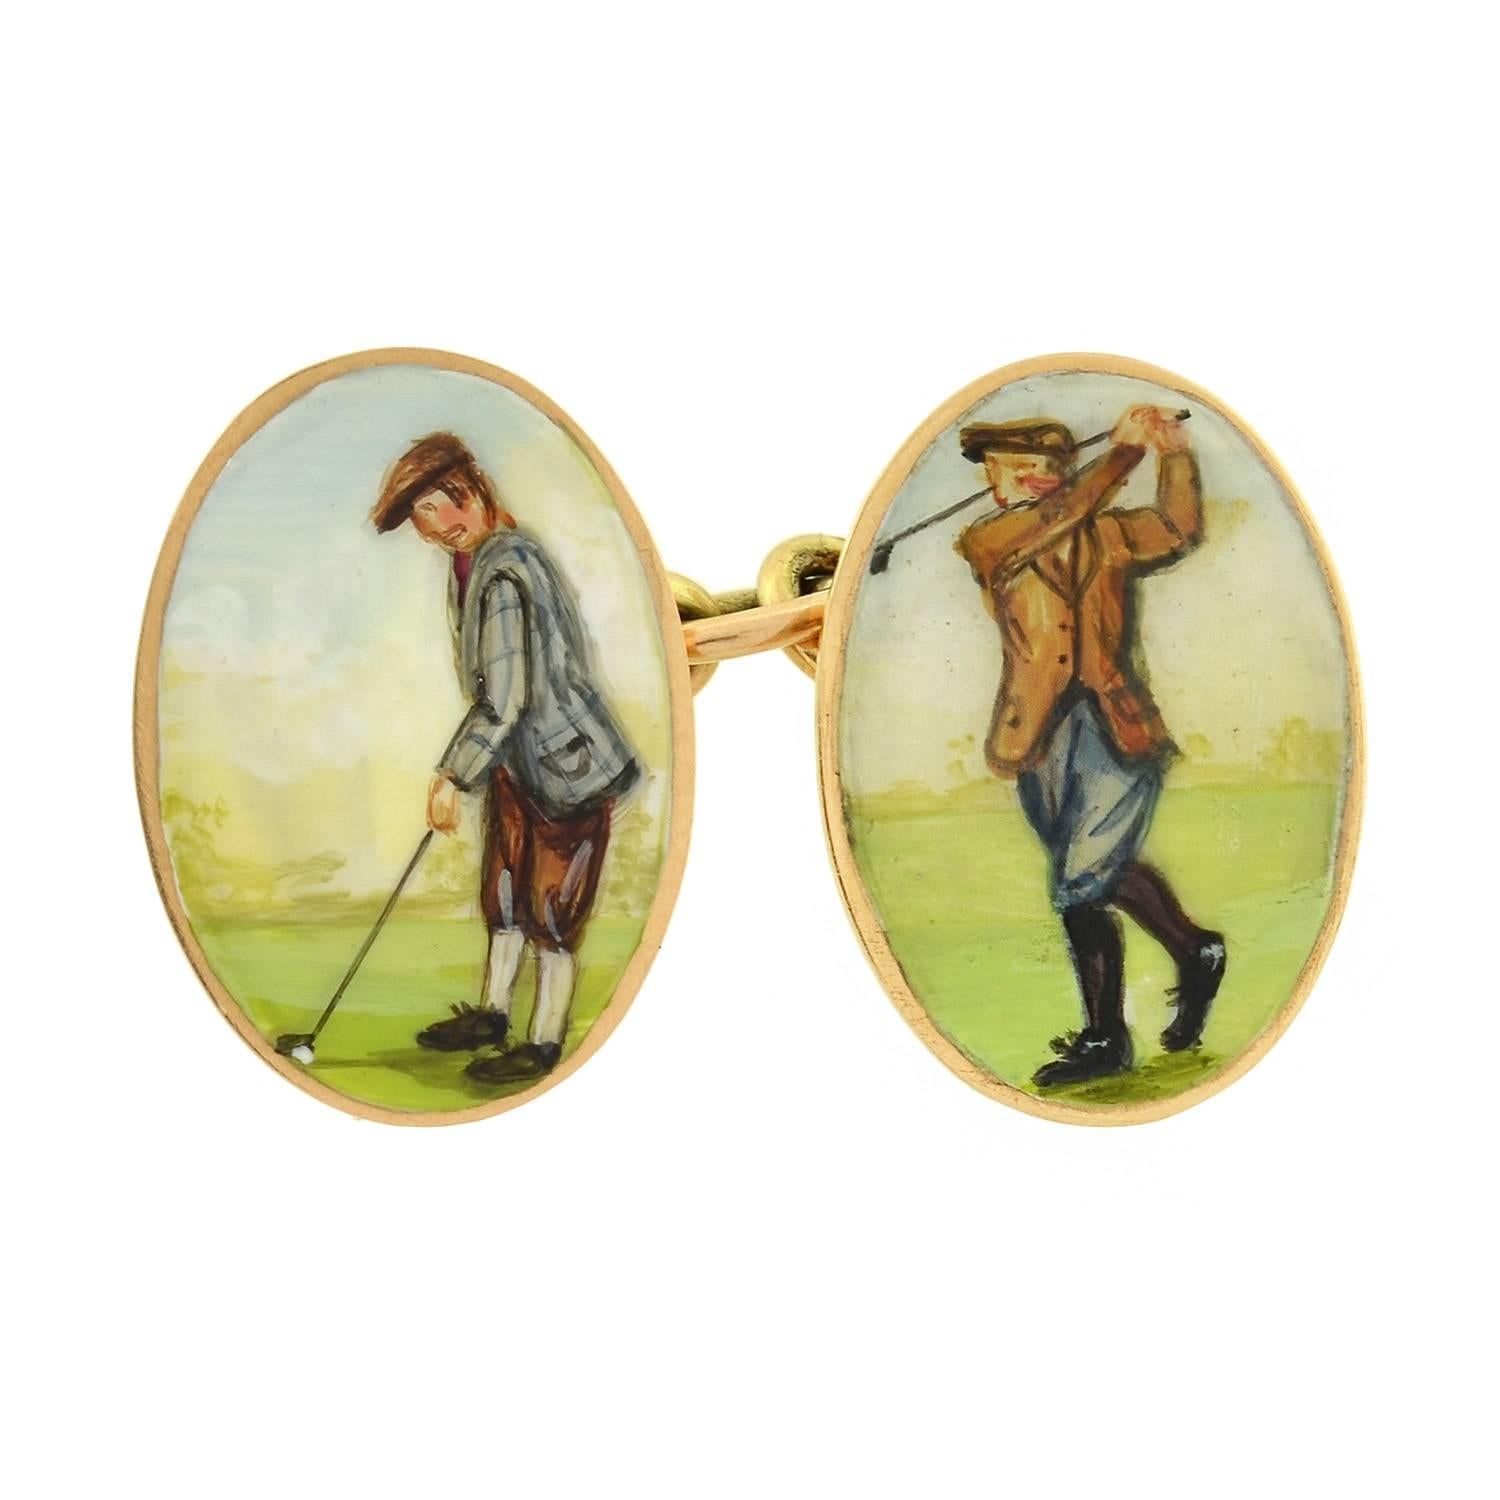 A wonderful pair of enameled cufflinks from the Victorian (ca1880) era! English in origin, each 15kt gold cufflink has a double-sided design comprised of two oval discs. Each disc depicts a unique golf motif, which is illustrated in hand-painted